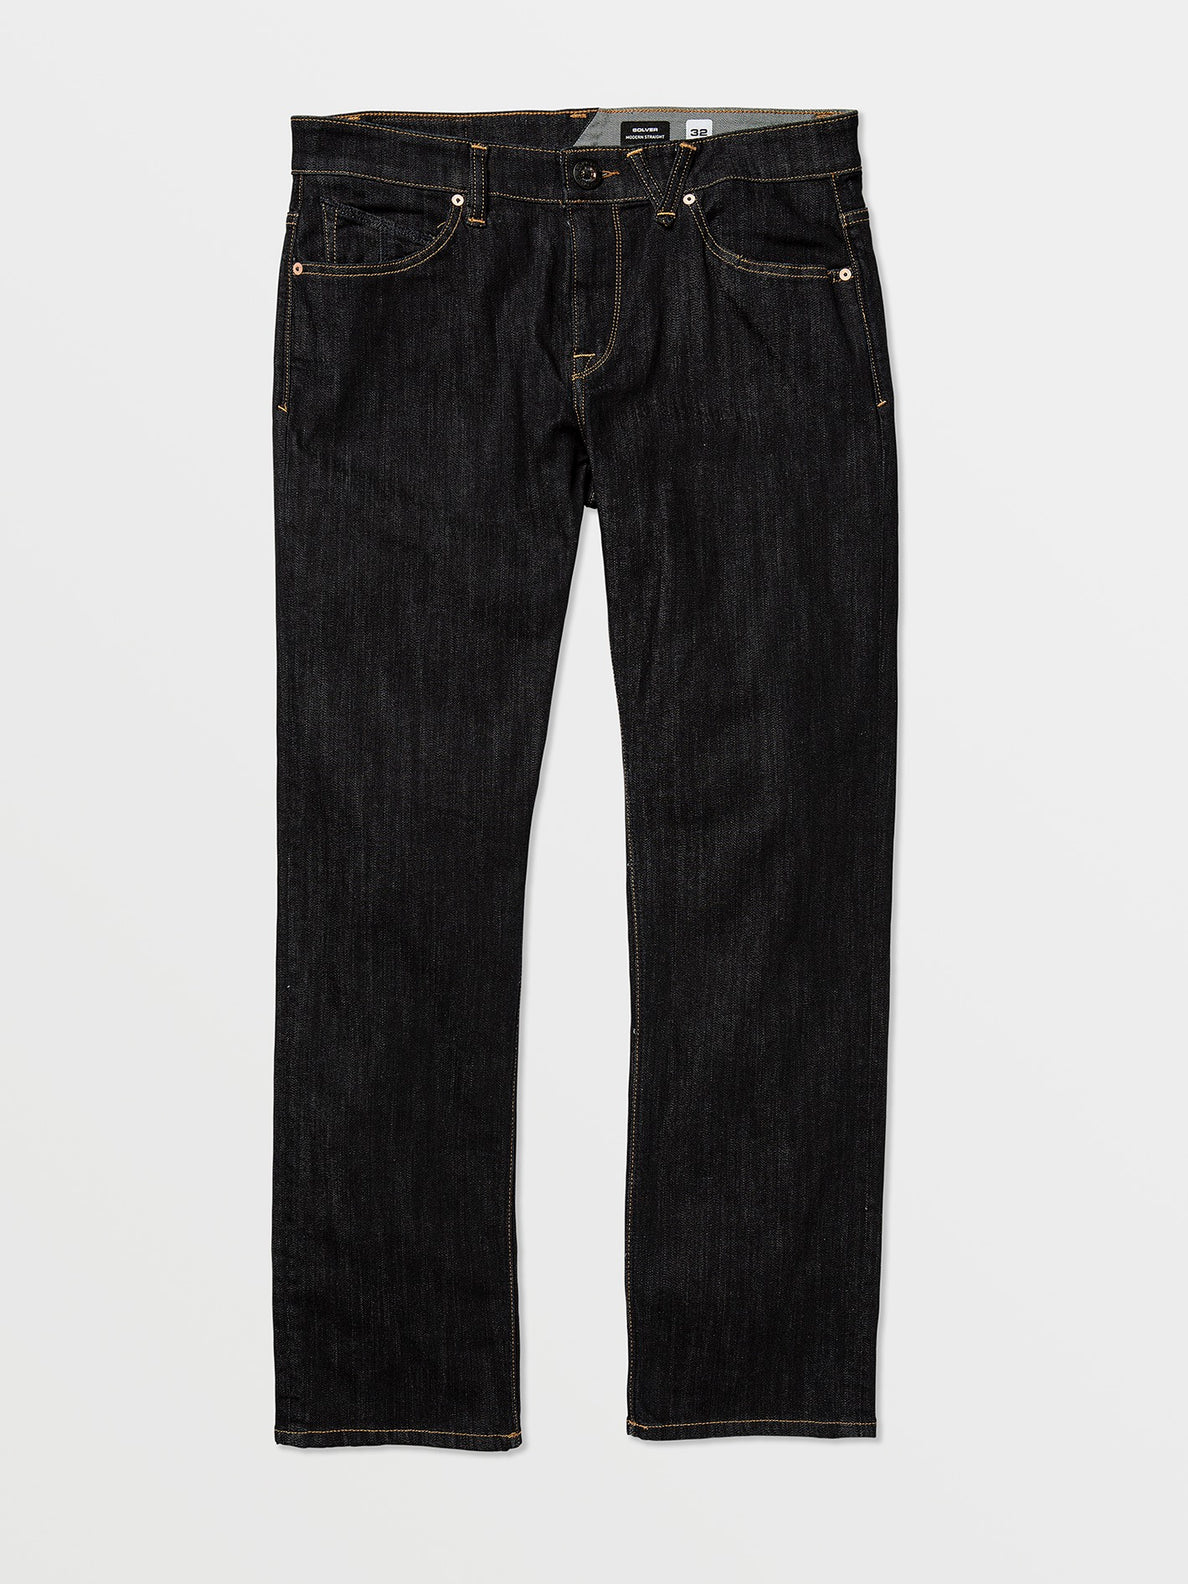 Solver Modern Fit Jeans - Rinse